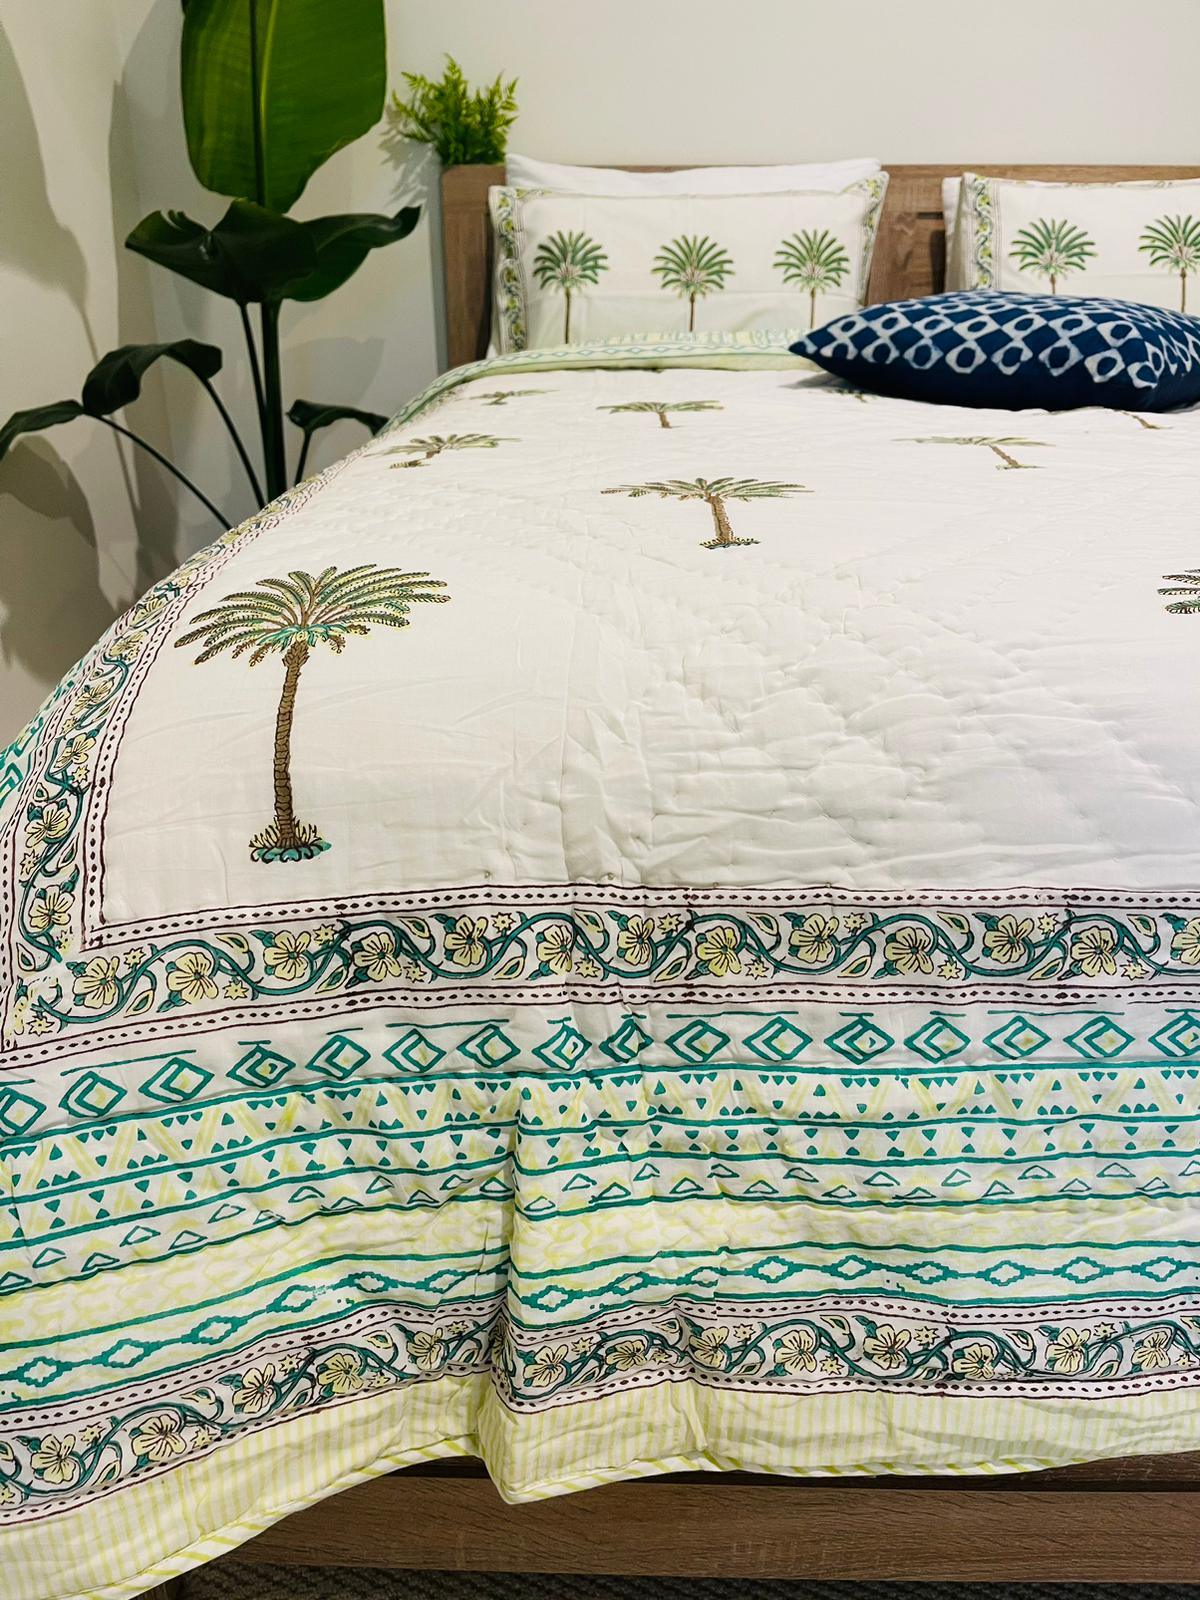 Palm tree Cotton Quilt/Bedspread Green Hand block print - Rooii by Tuvisha